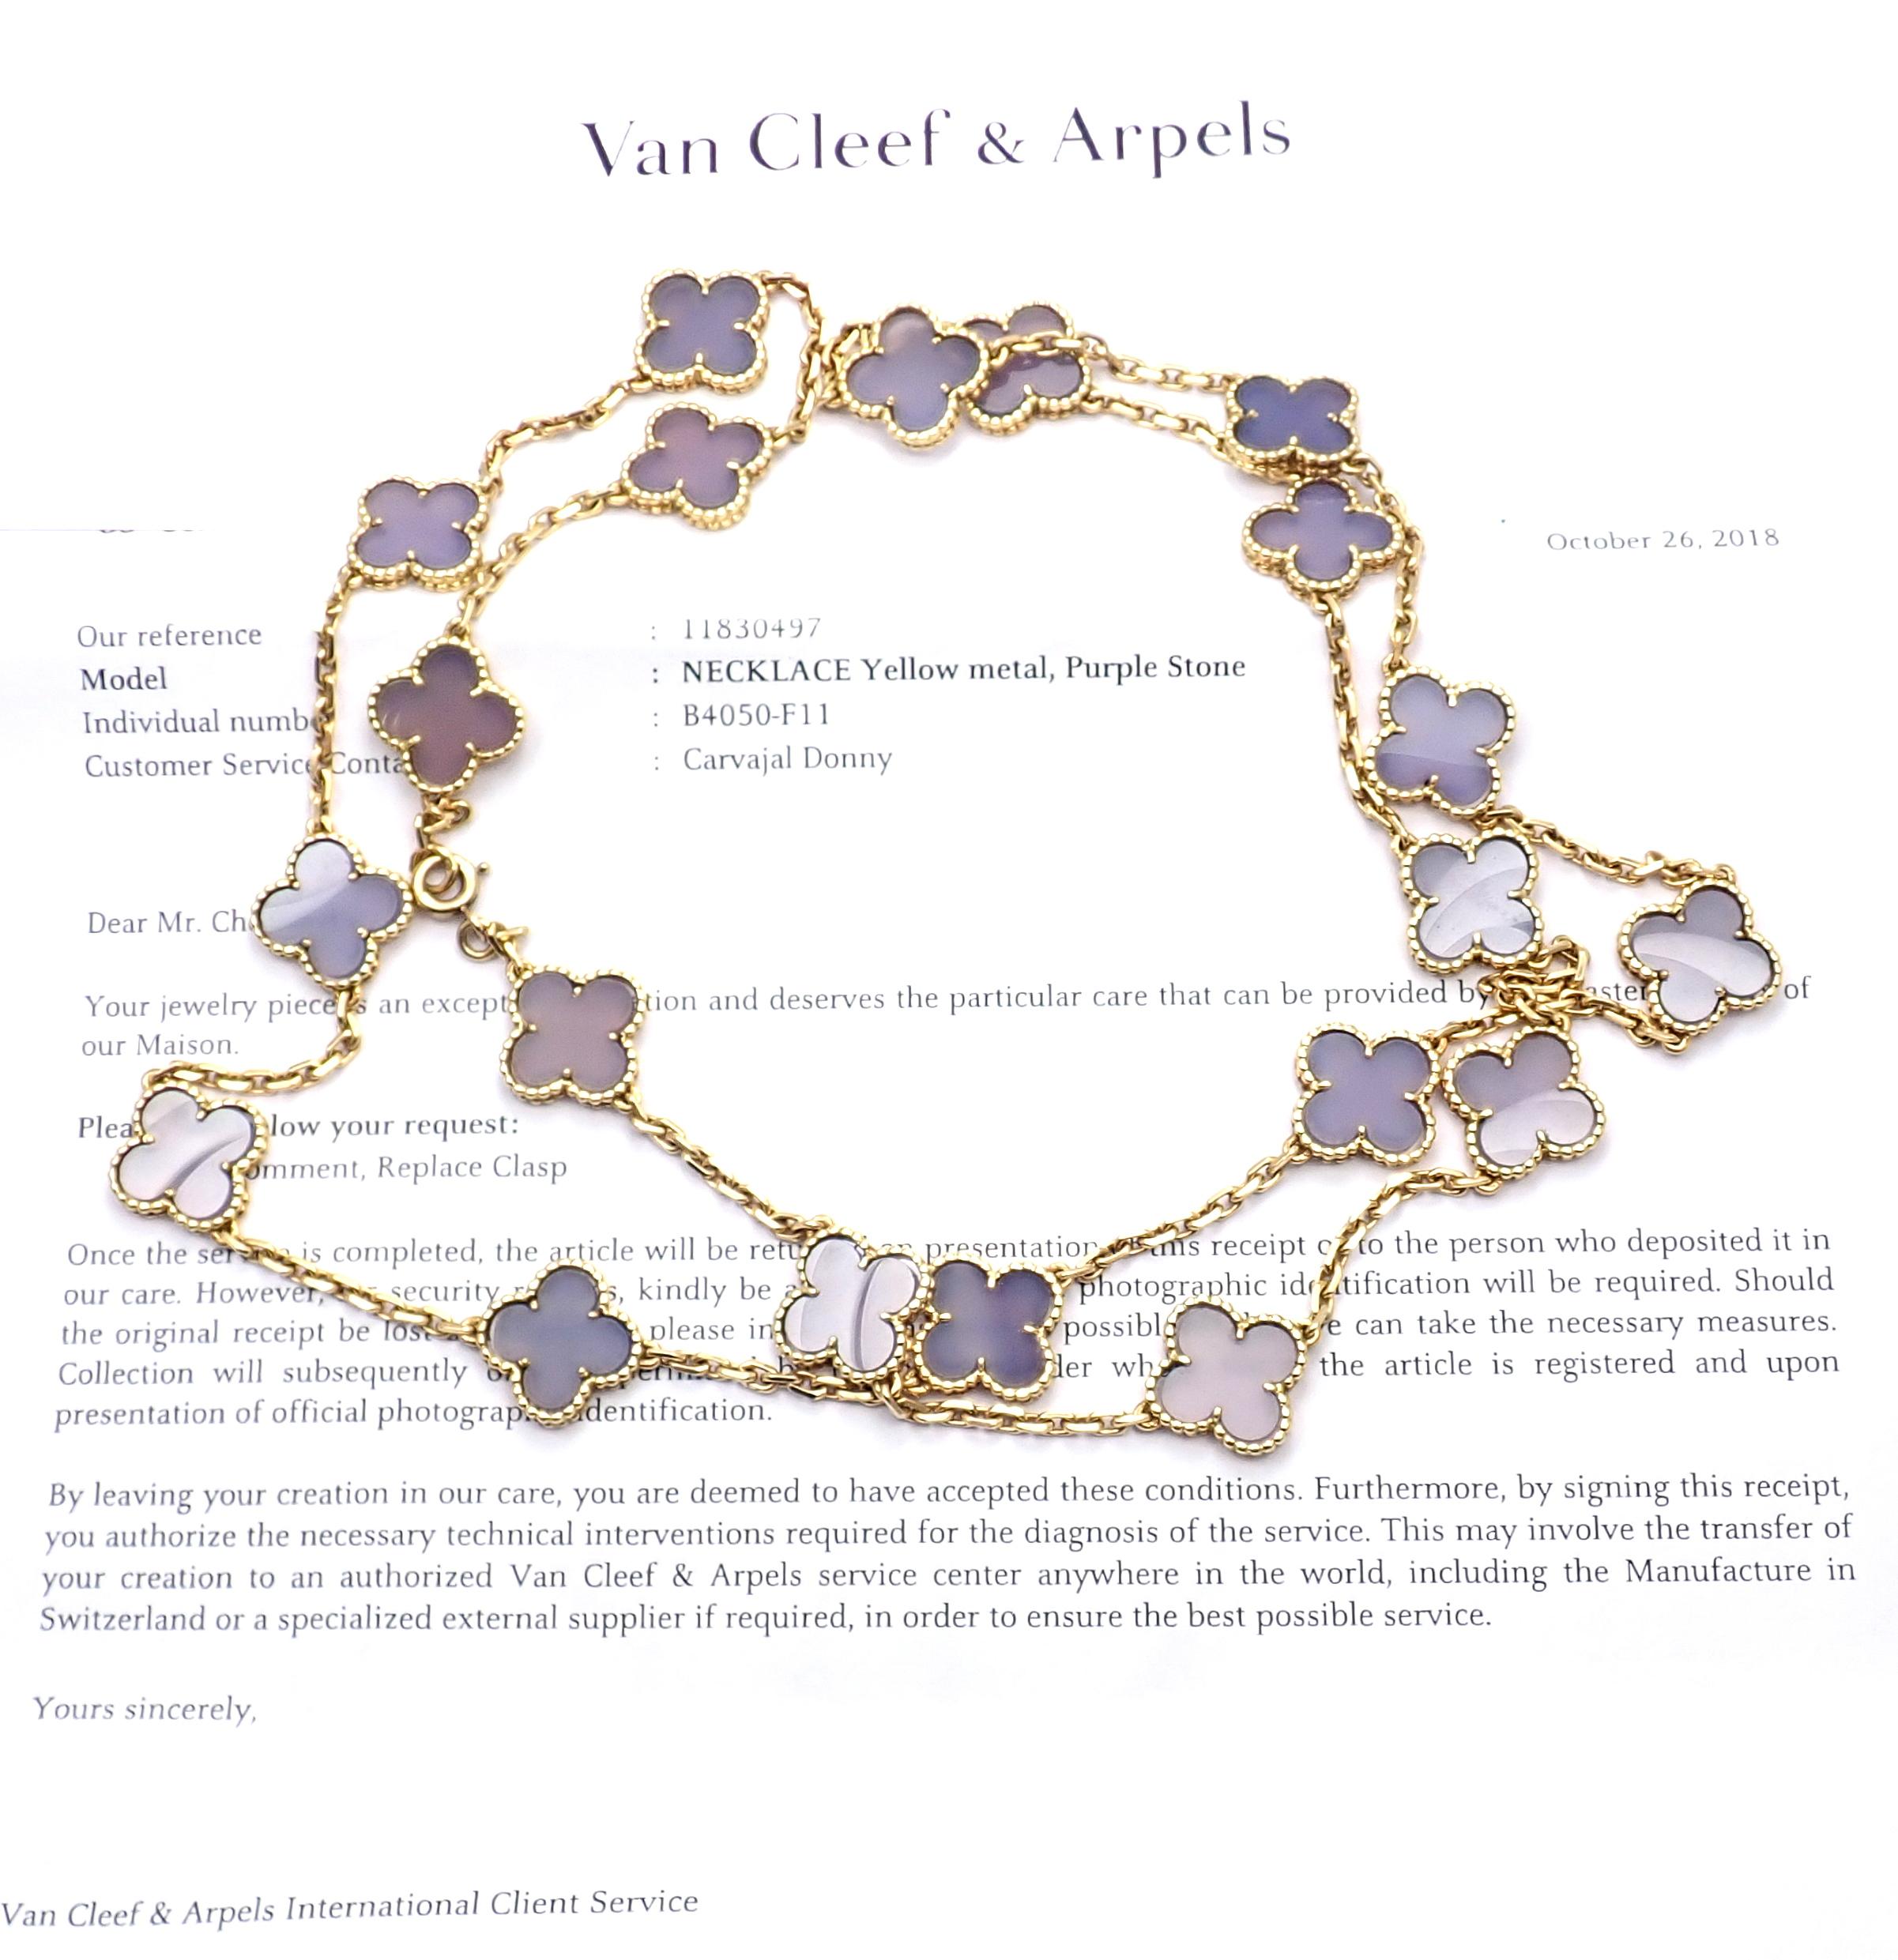 18k Yellow Gold Vintage 20 Alhambra Lavender Chalcedony Necklace by Van Cleef & Arpels.
With 20 motifs of lavender chalcedony alhambra stones 15mm each.
*** This is a rare, very collectible, retired Van Cleef & Arpels lavender chalcedony Alhambra